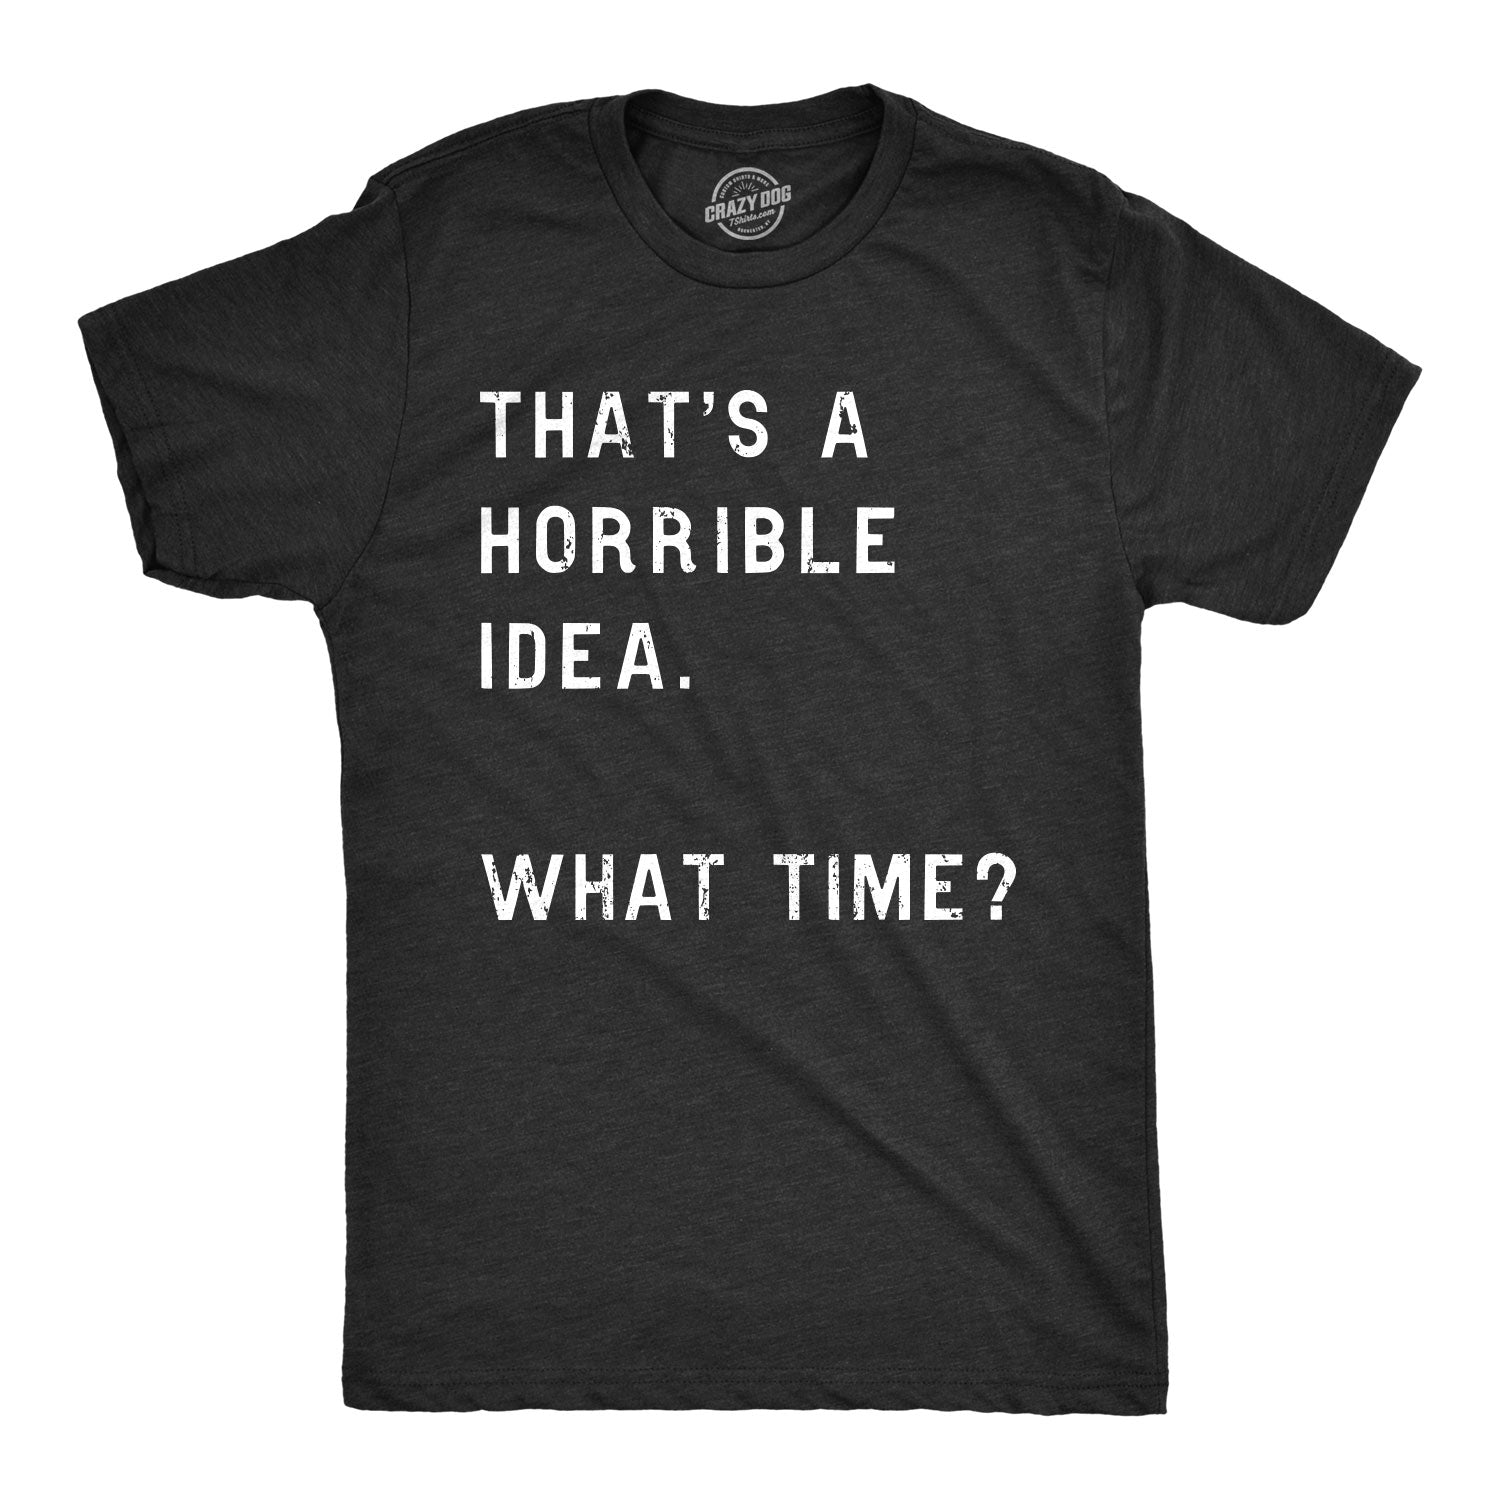 Funny Heather Black That Sounds Like A Horrible Idea. What Time? Mens T Shirt Nerdy Sarcastic Tee